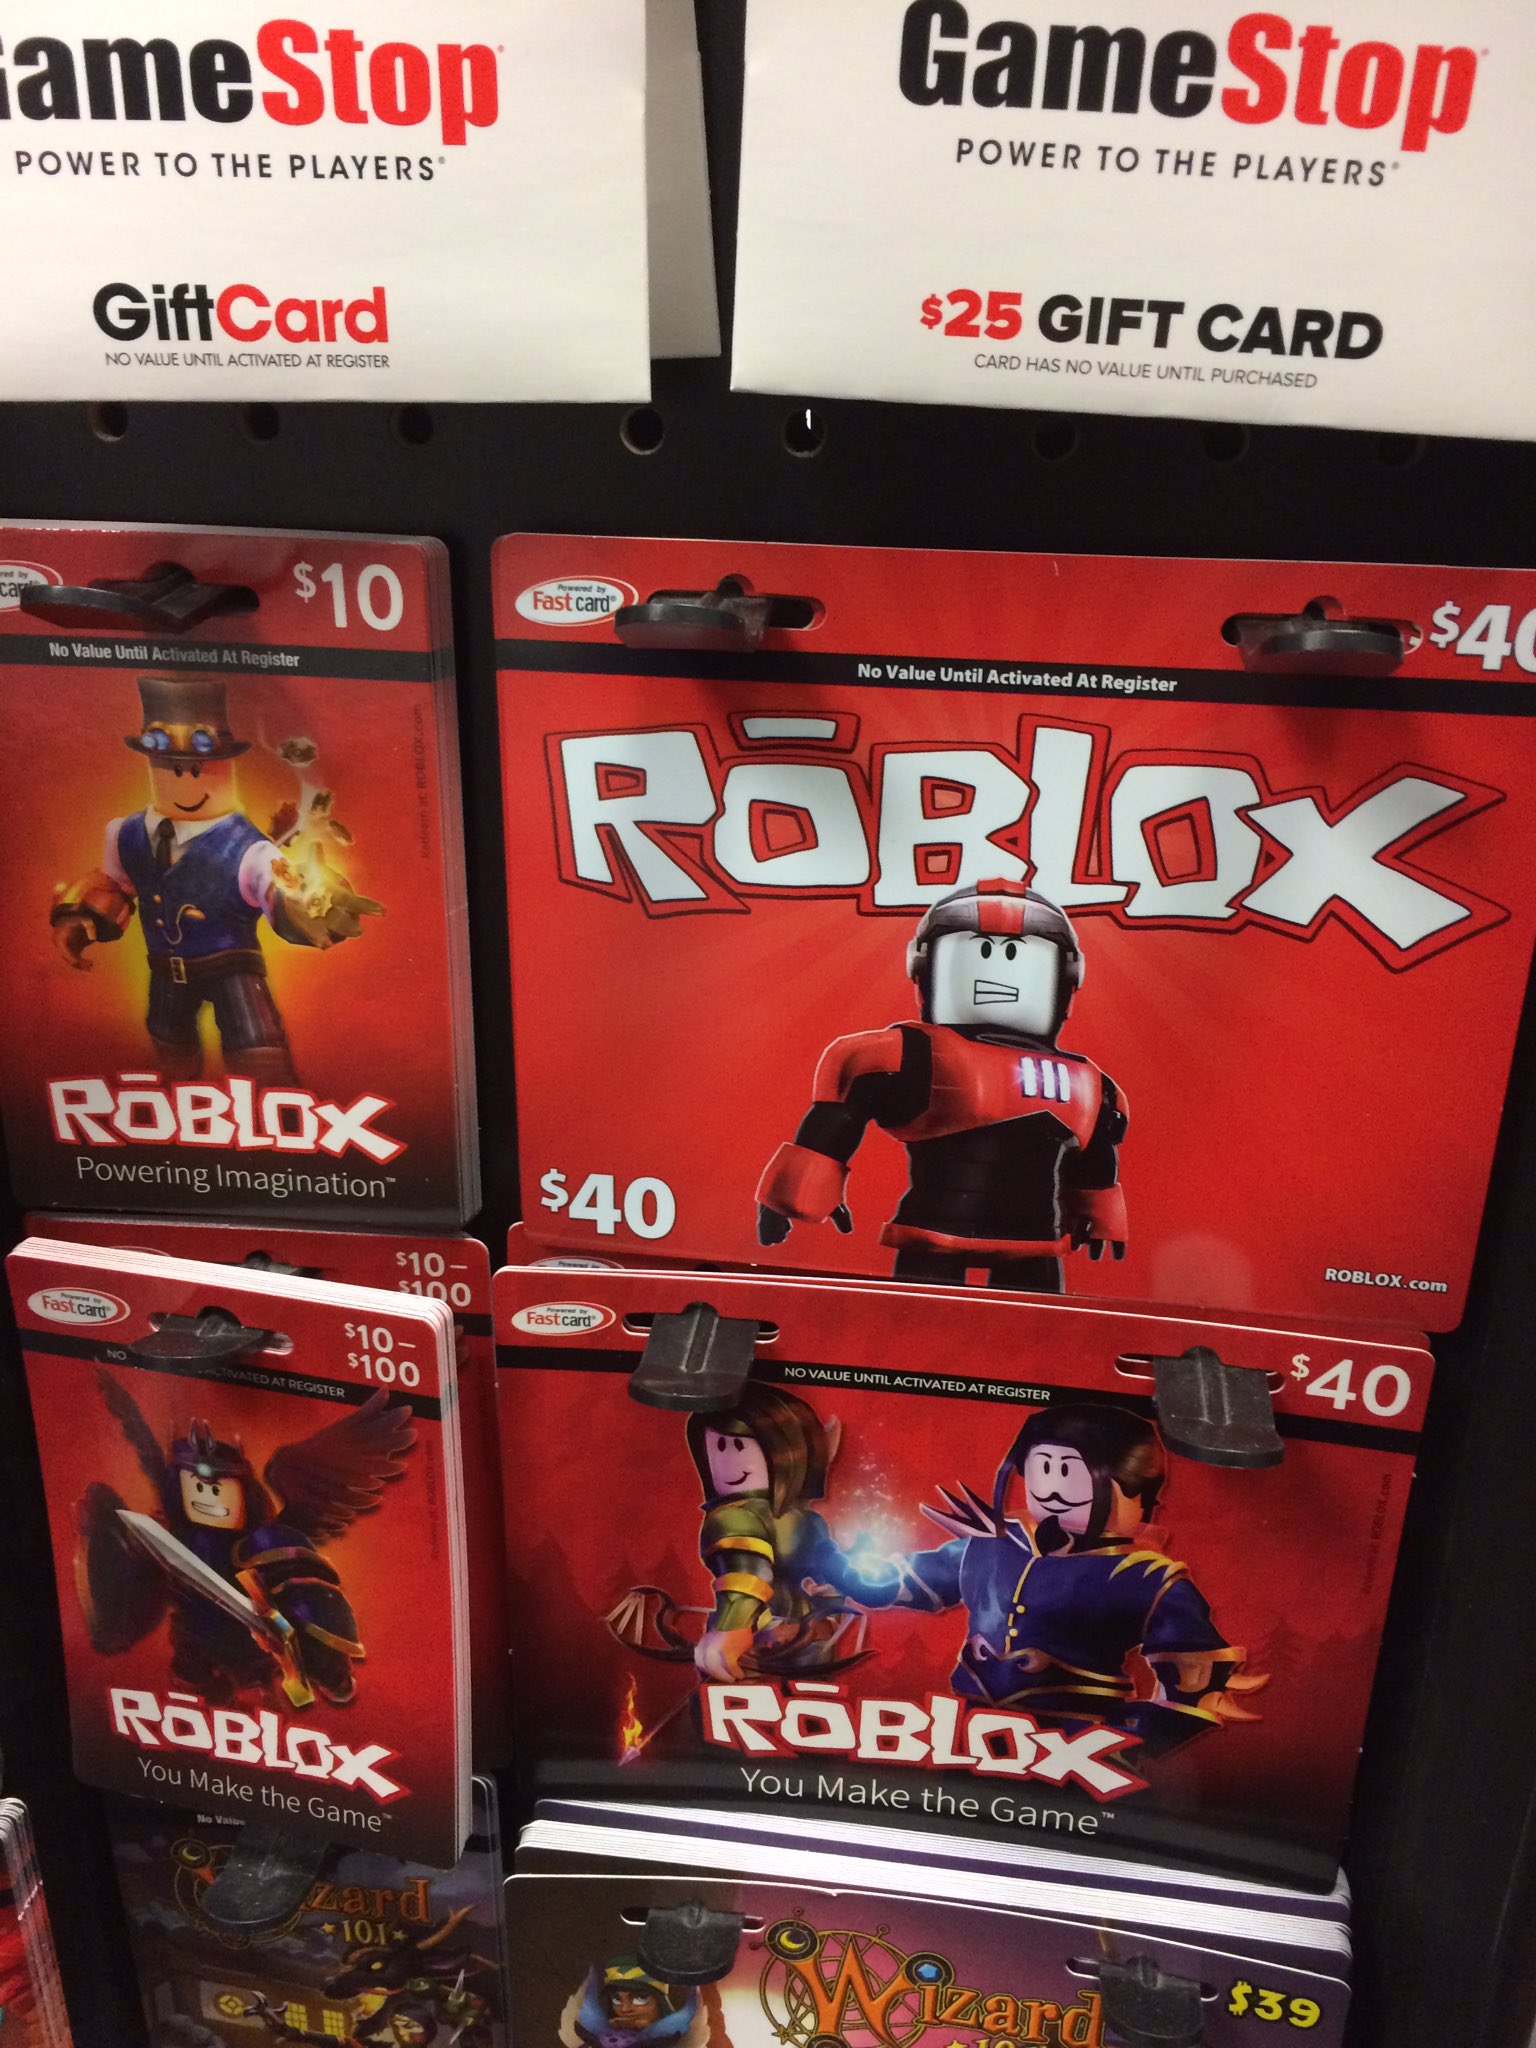 Evan Zirschky On Twitter Currently At Gamestop Buying The Roblox Cards For The Salvage Roblox 1k Follower Stream That S Hopefully Coming Up Soon Https T Co Qiea91rk9r - gamestop roblox toys